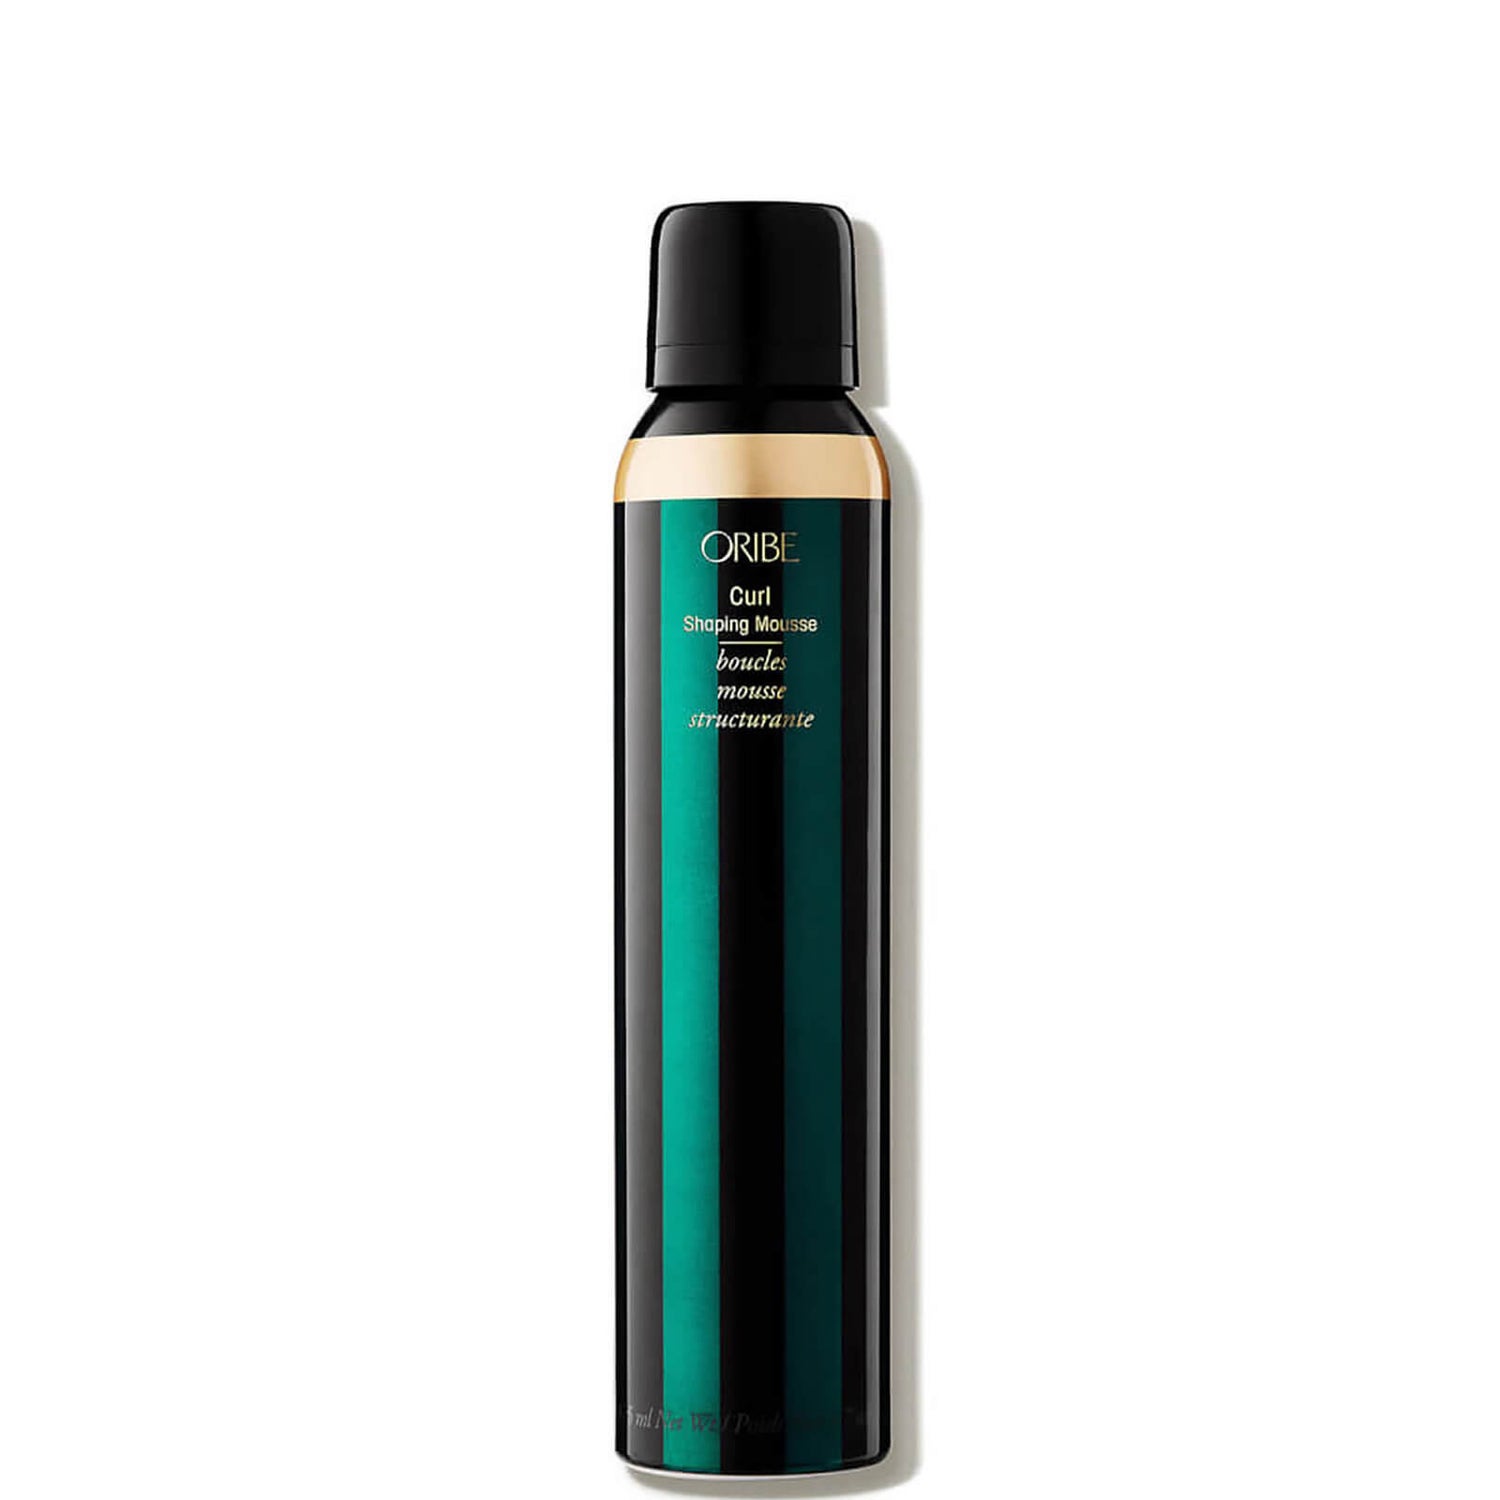 Oribe Curl Shaping Mousse 5.7 oz.